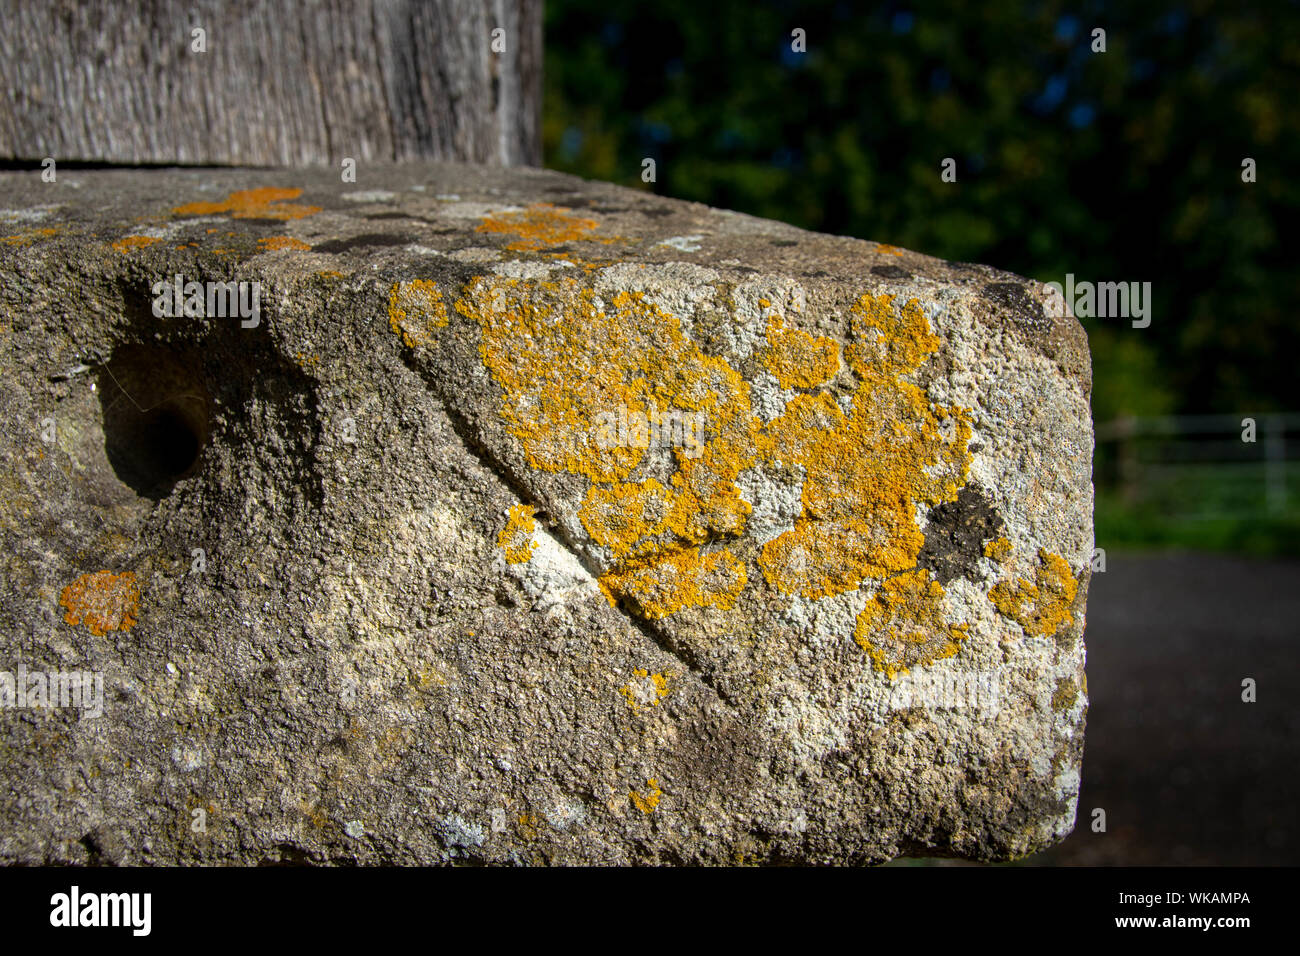 Stone work or stone wall with yellow, white and brown lichen growing over it. Stock Photo